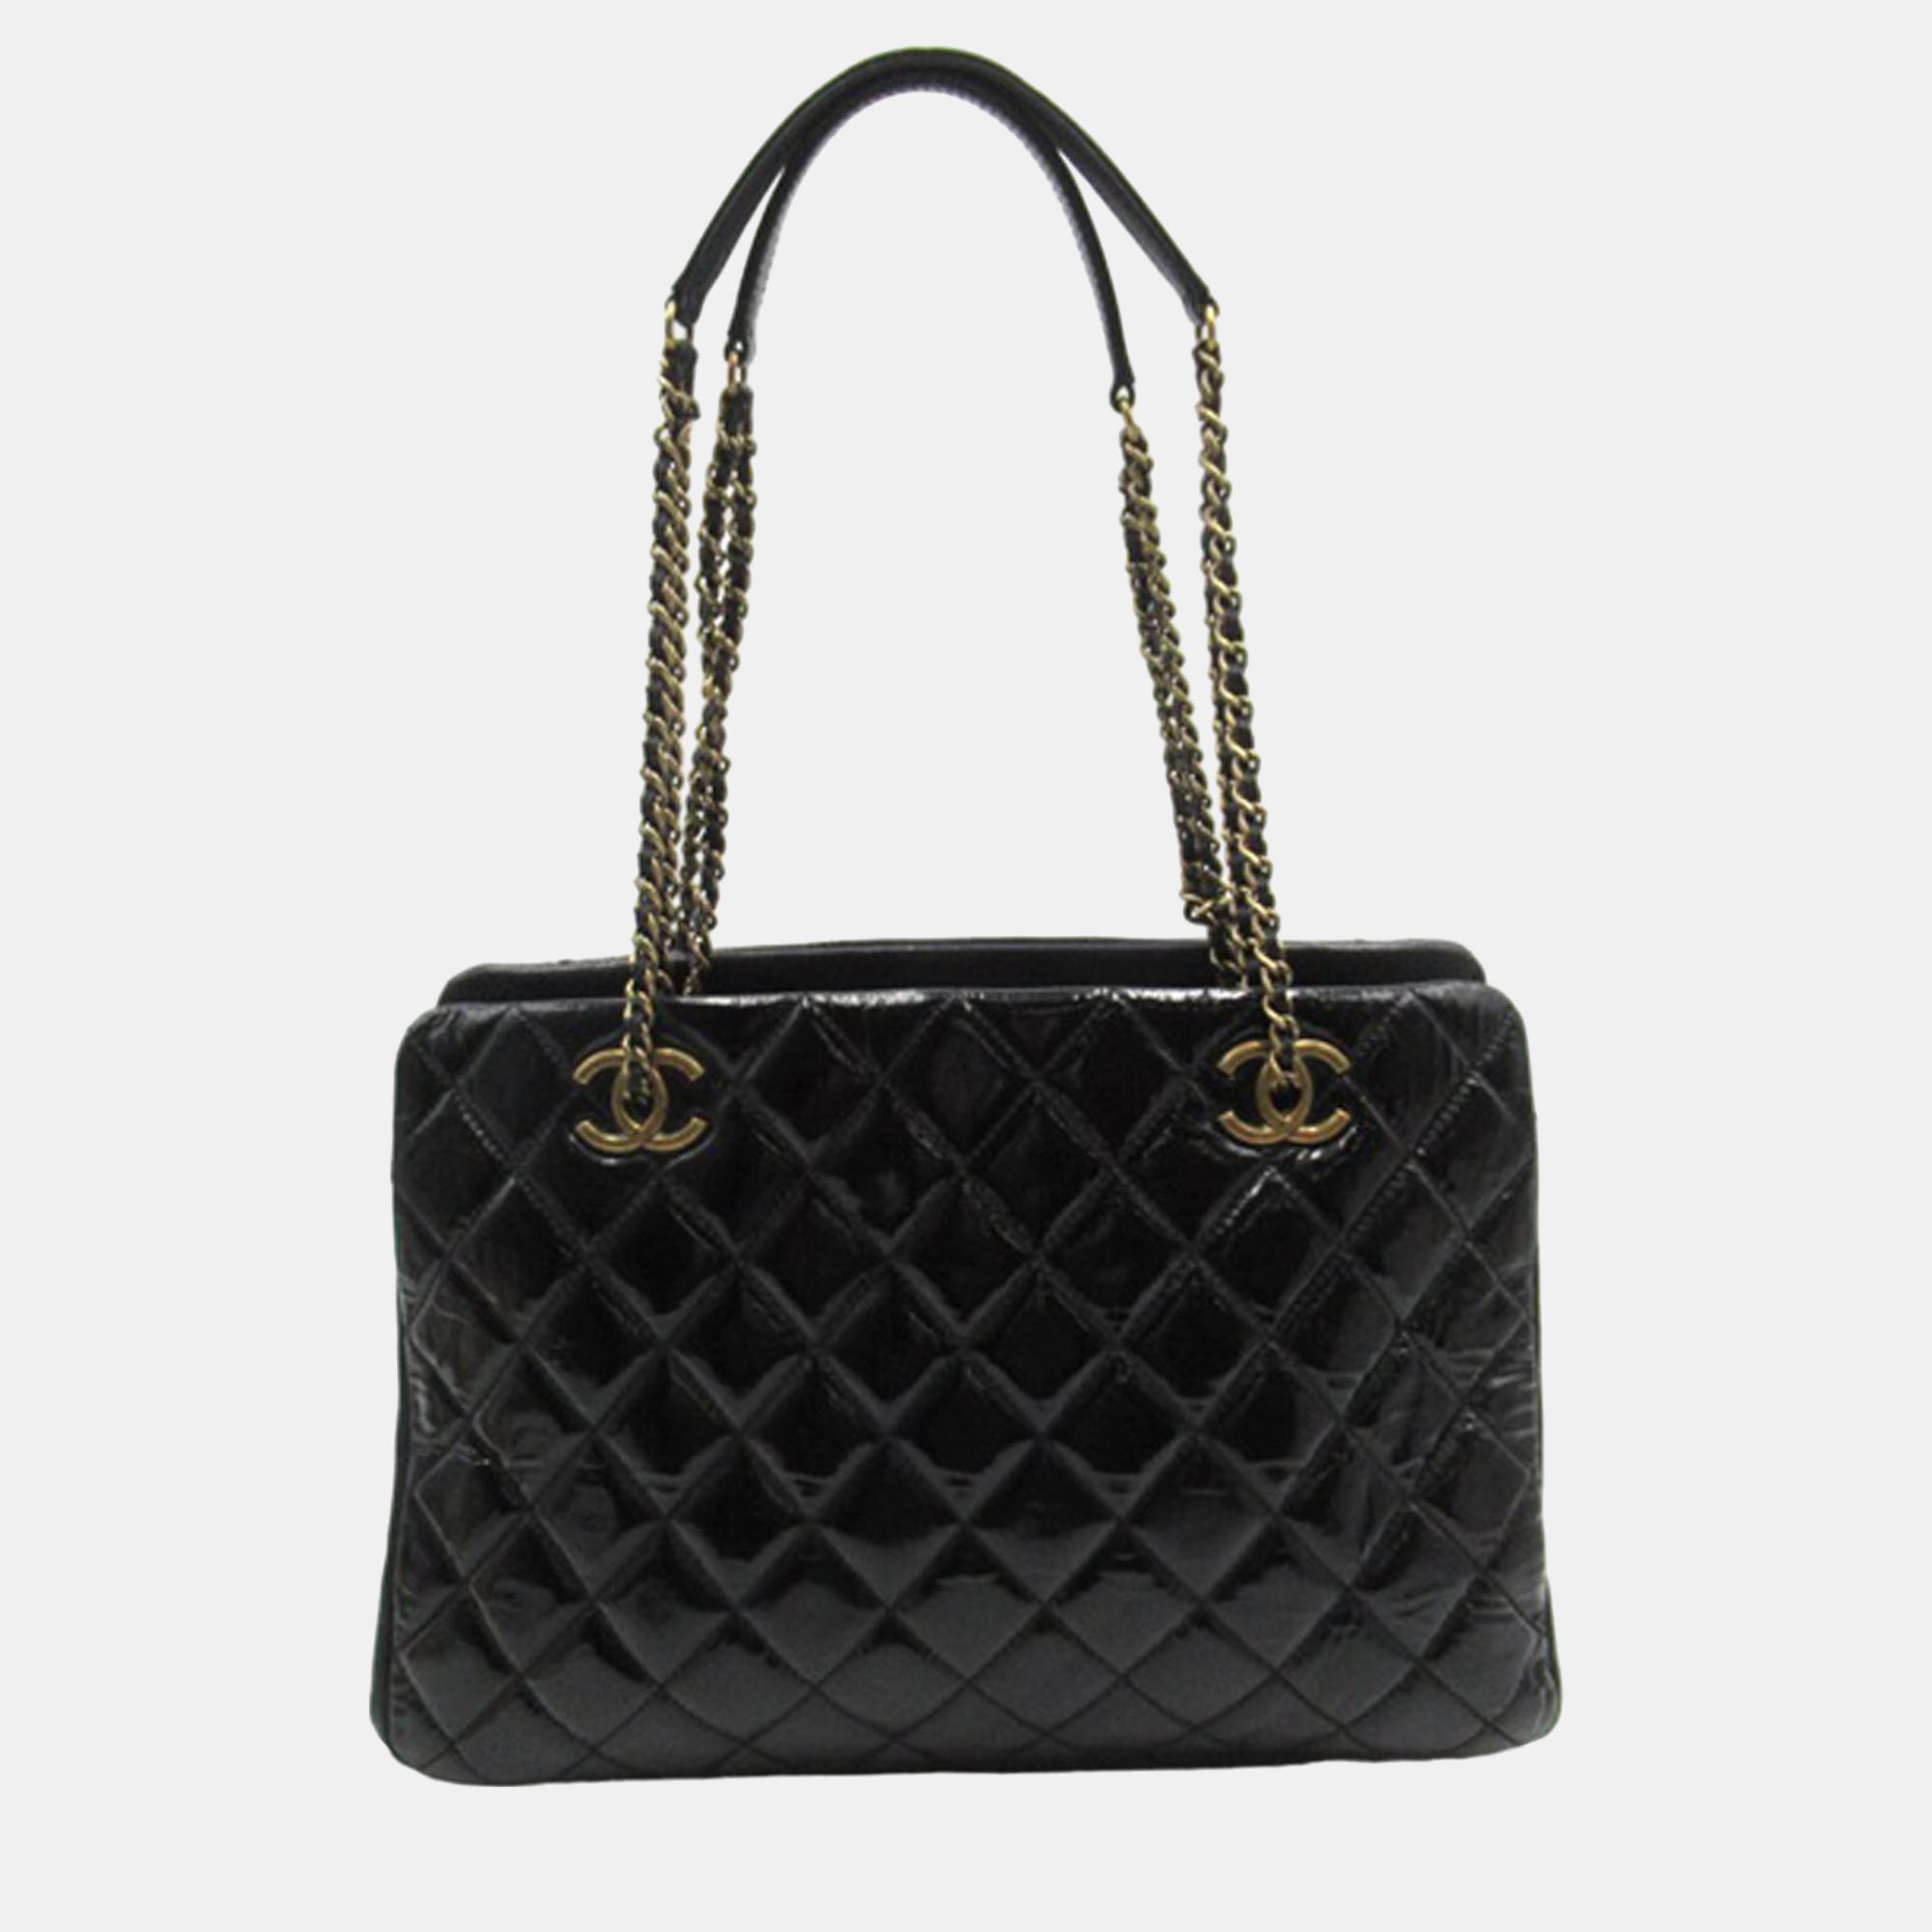 This shoulder bag features a quilted patent goatskin leather body a leather woven chain shoulder strap with leather guard a top zip closure interior open compartments and an interior zip pocket.